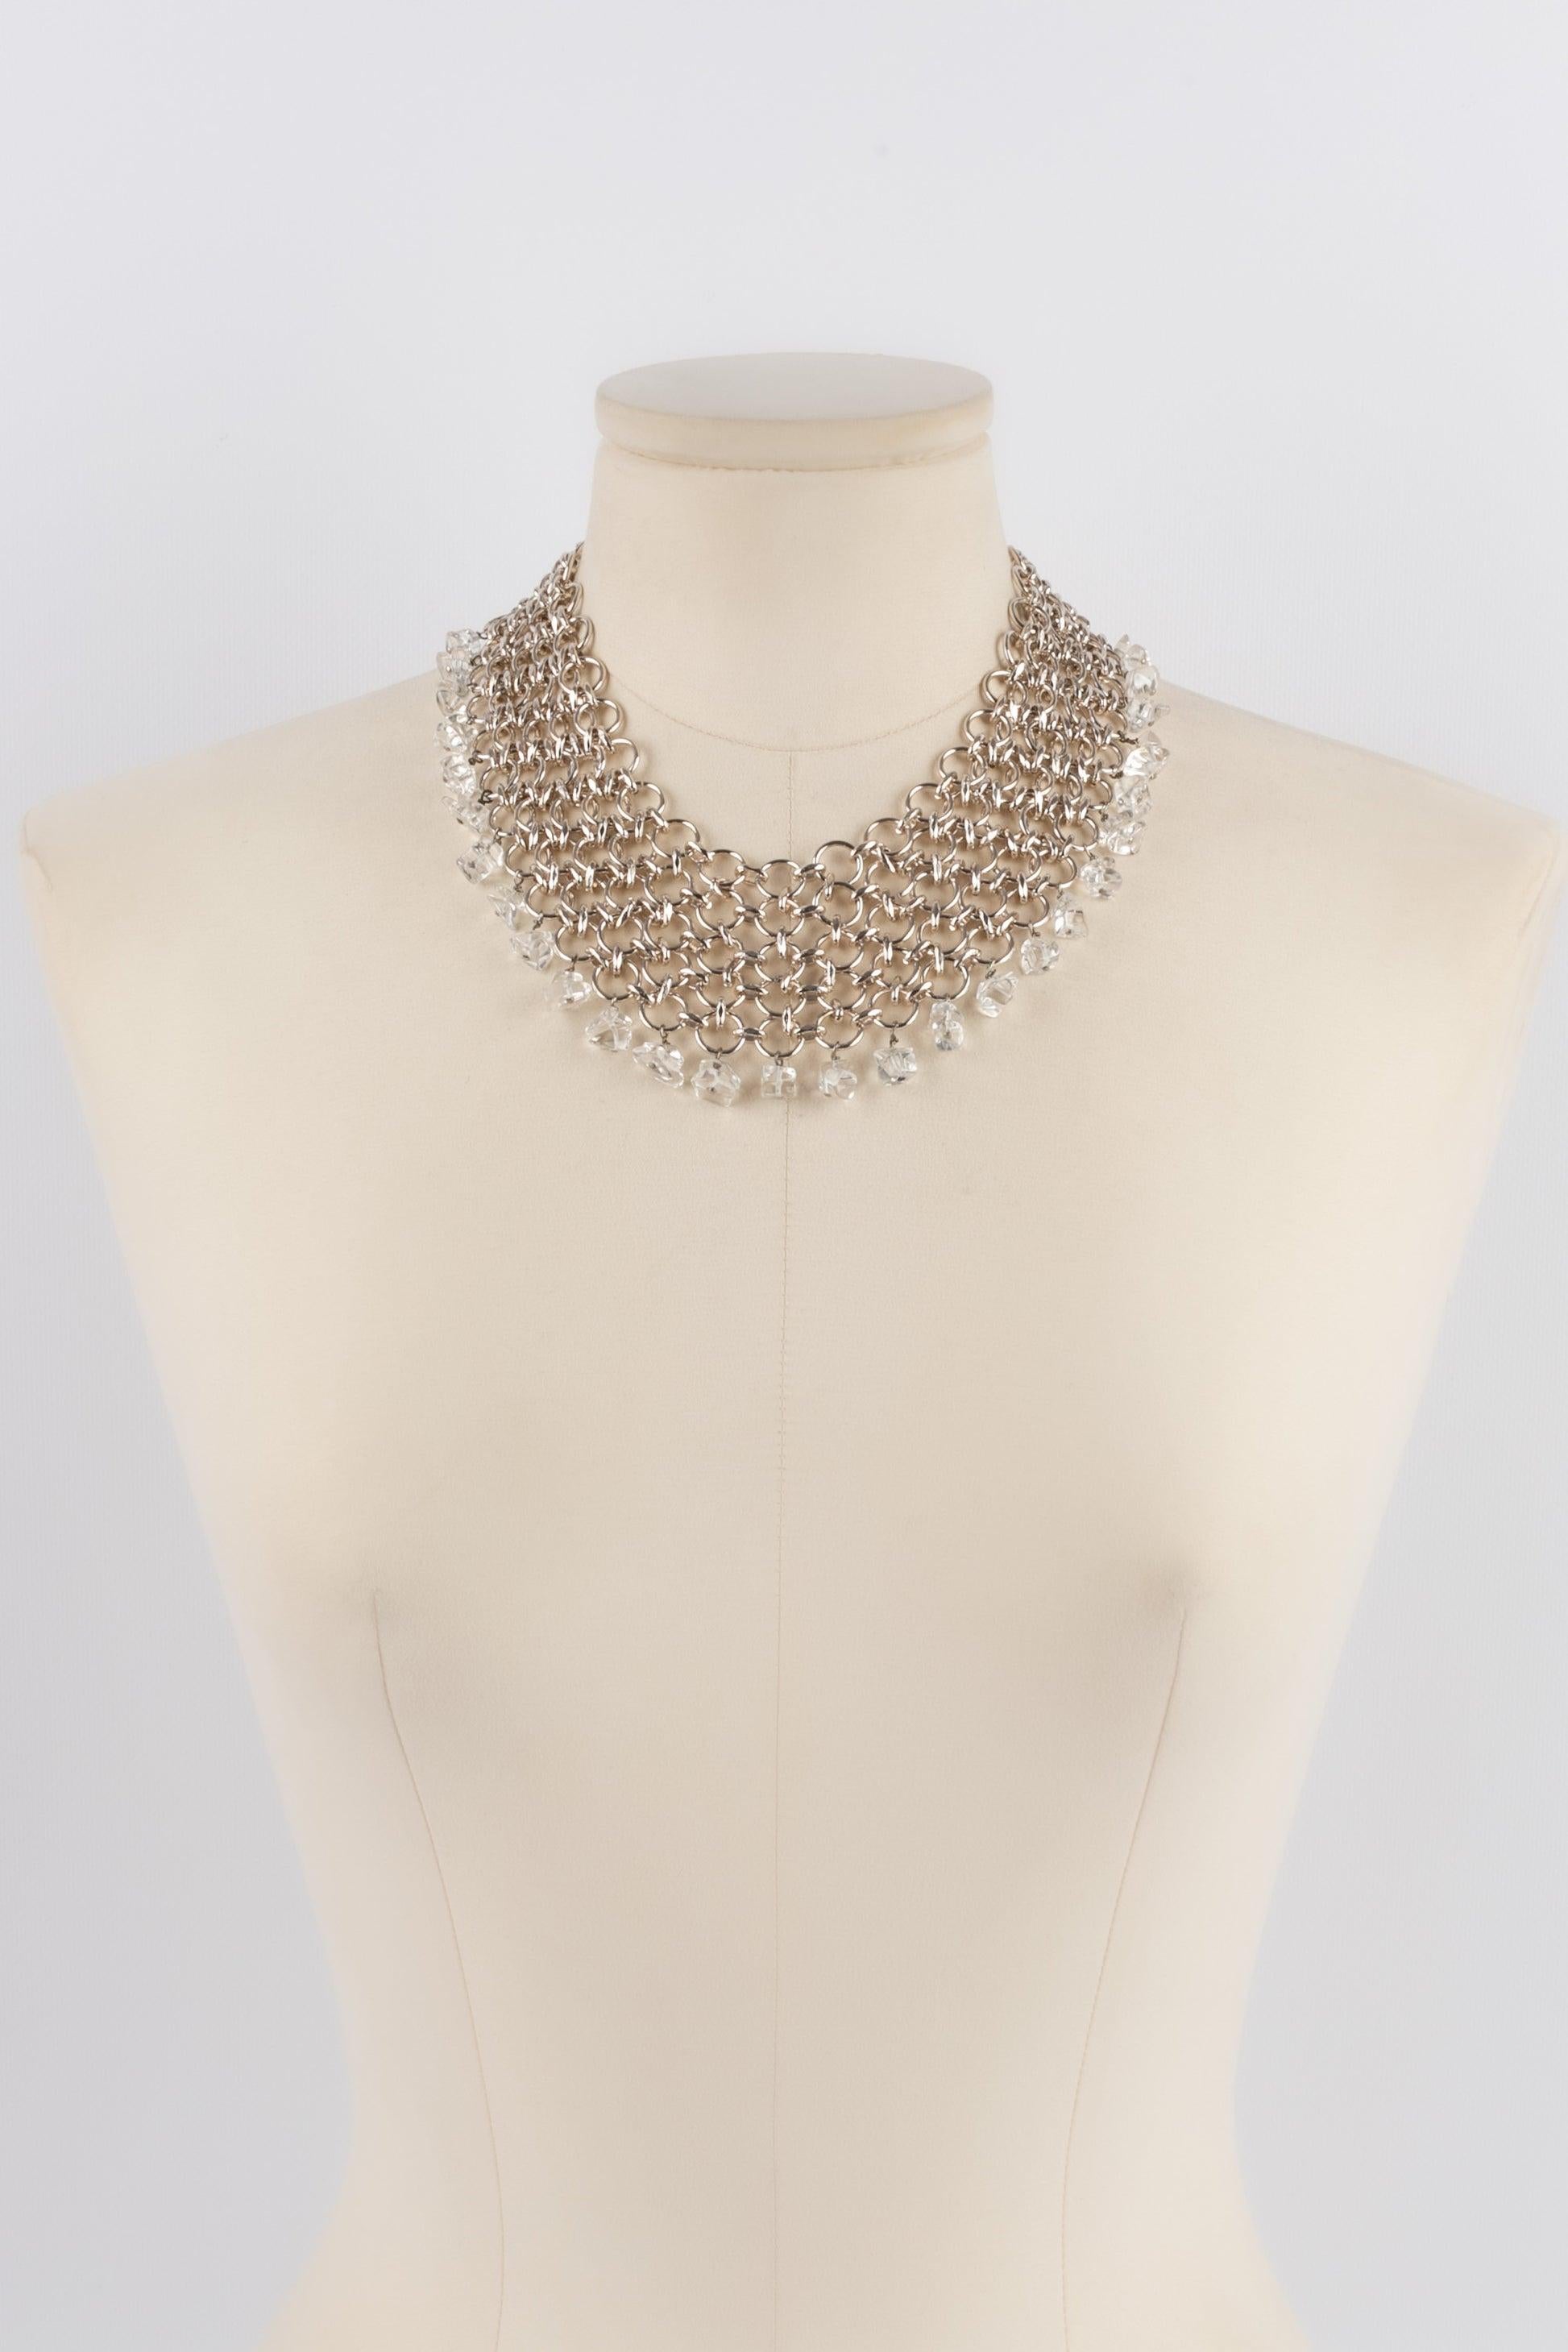 Paco Rabanne Silvery Metal Necklace, 2000s For Sale 1